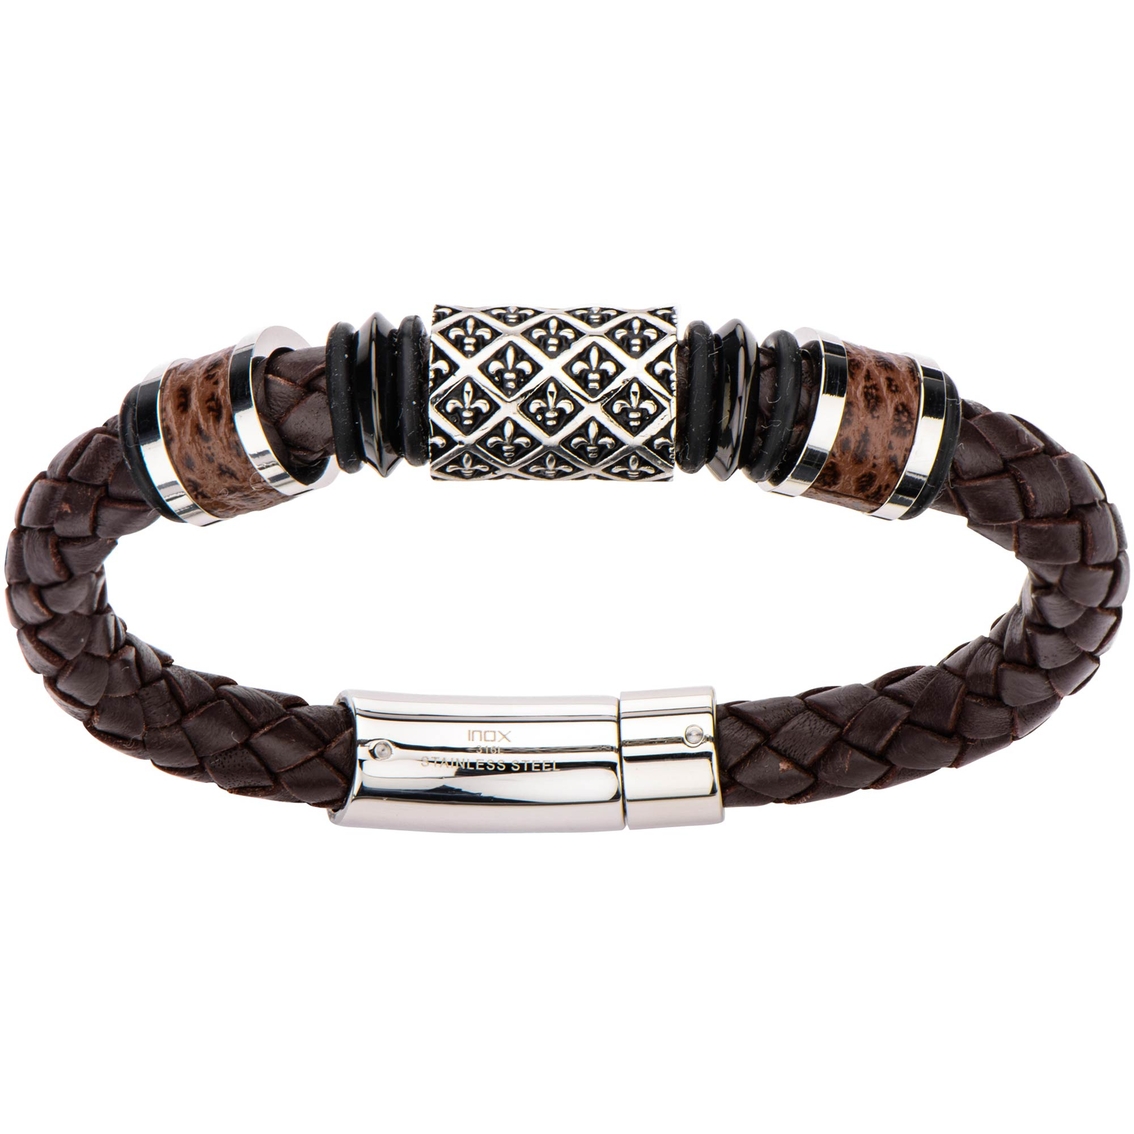 Leather and Stainless Steel Bracelet - Image 2 of 2